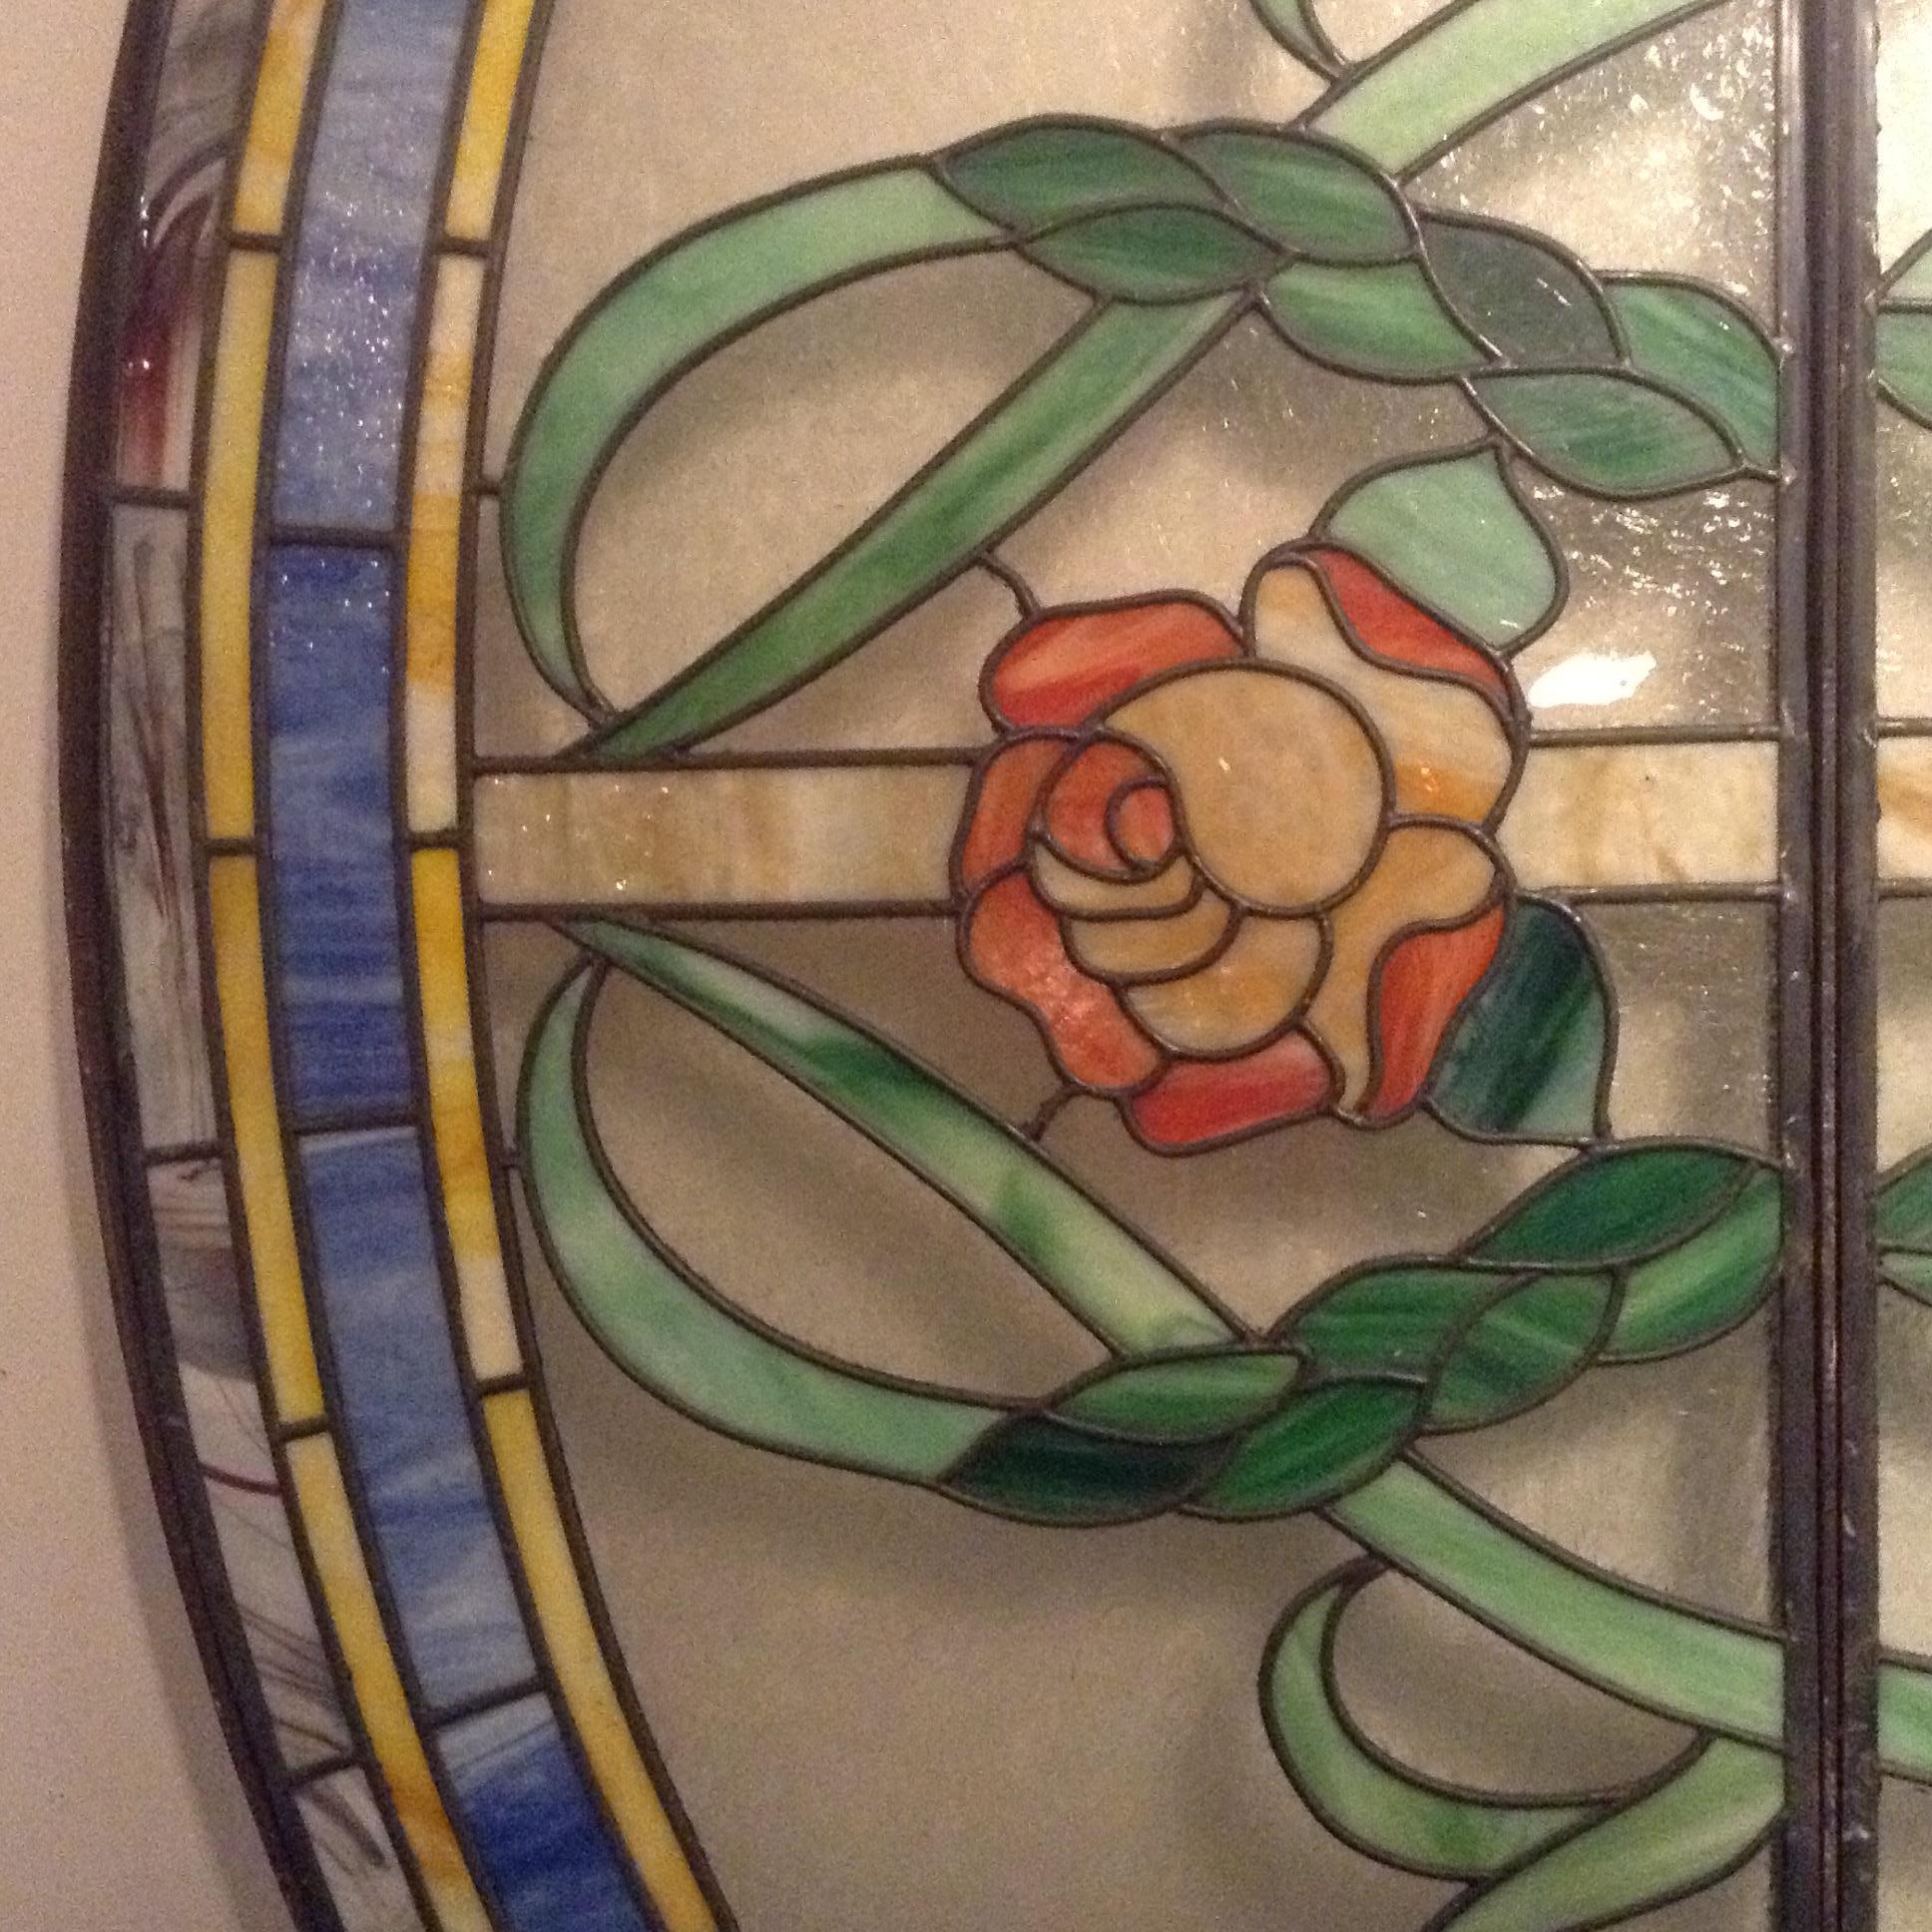 Metal Massive Architectural 1970’s Six Panel Stained Glass Oval Window / Drop Ceiling For Sale